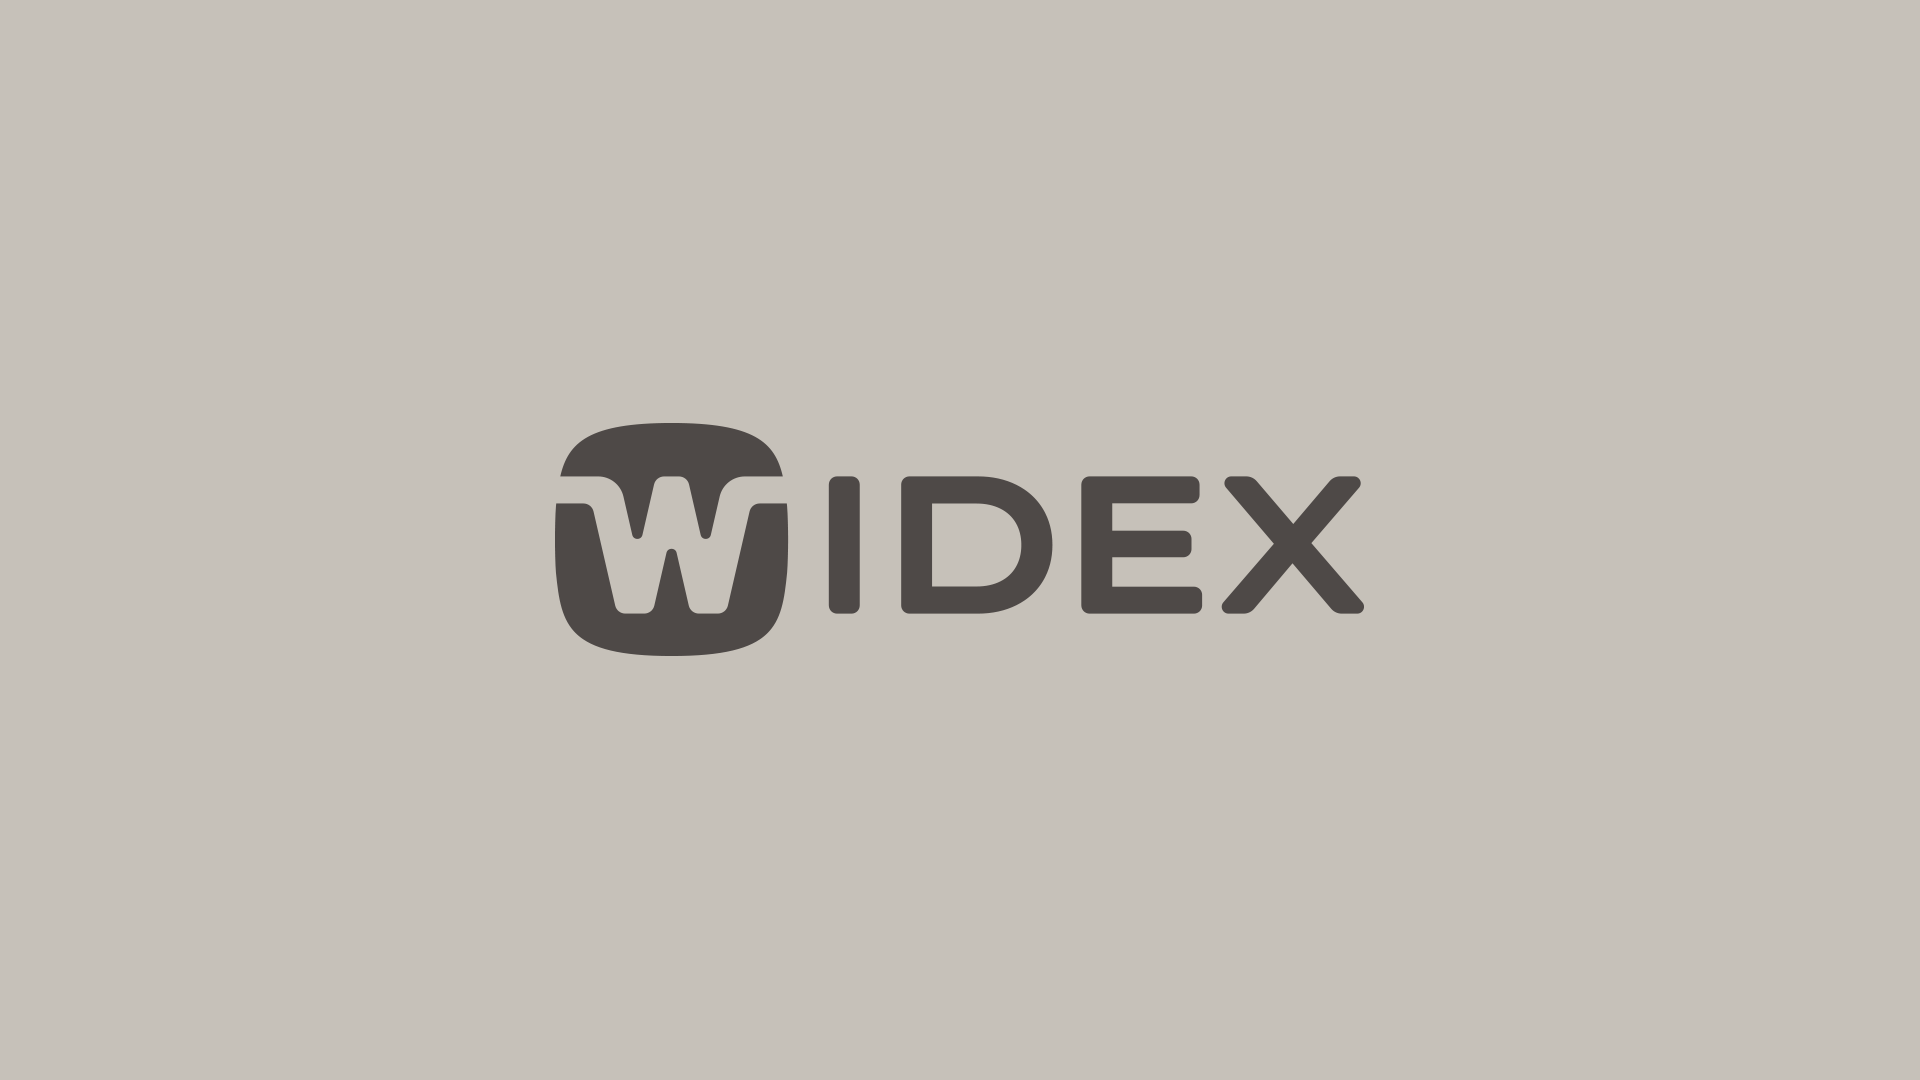 WIDEX logo on positive background color by LOOP Associates